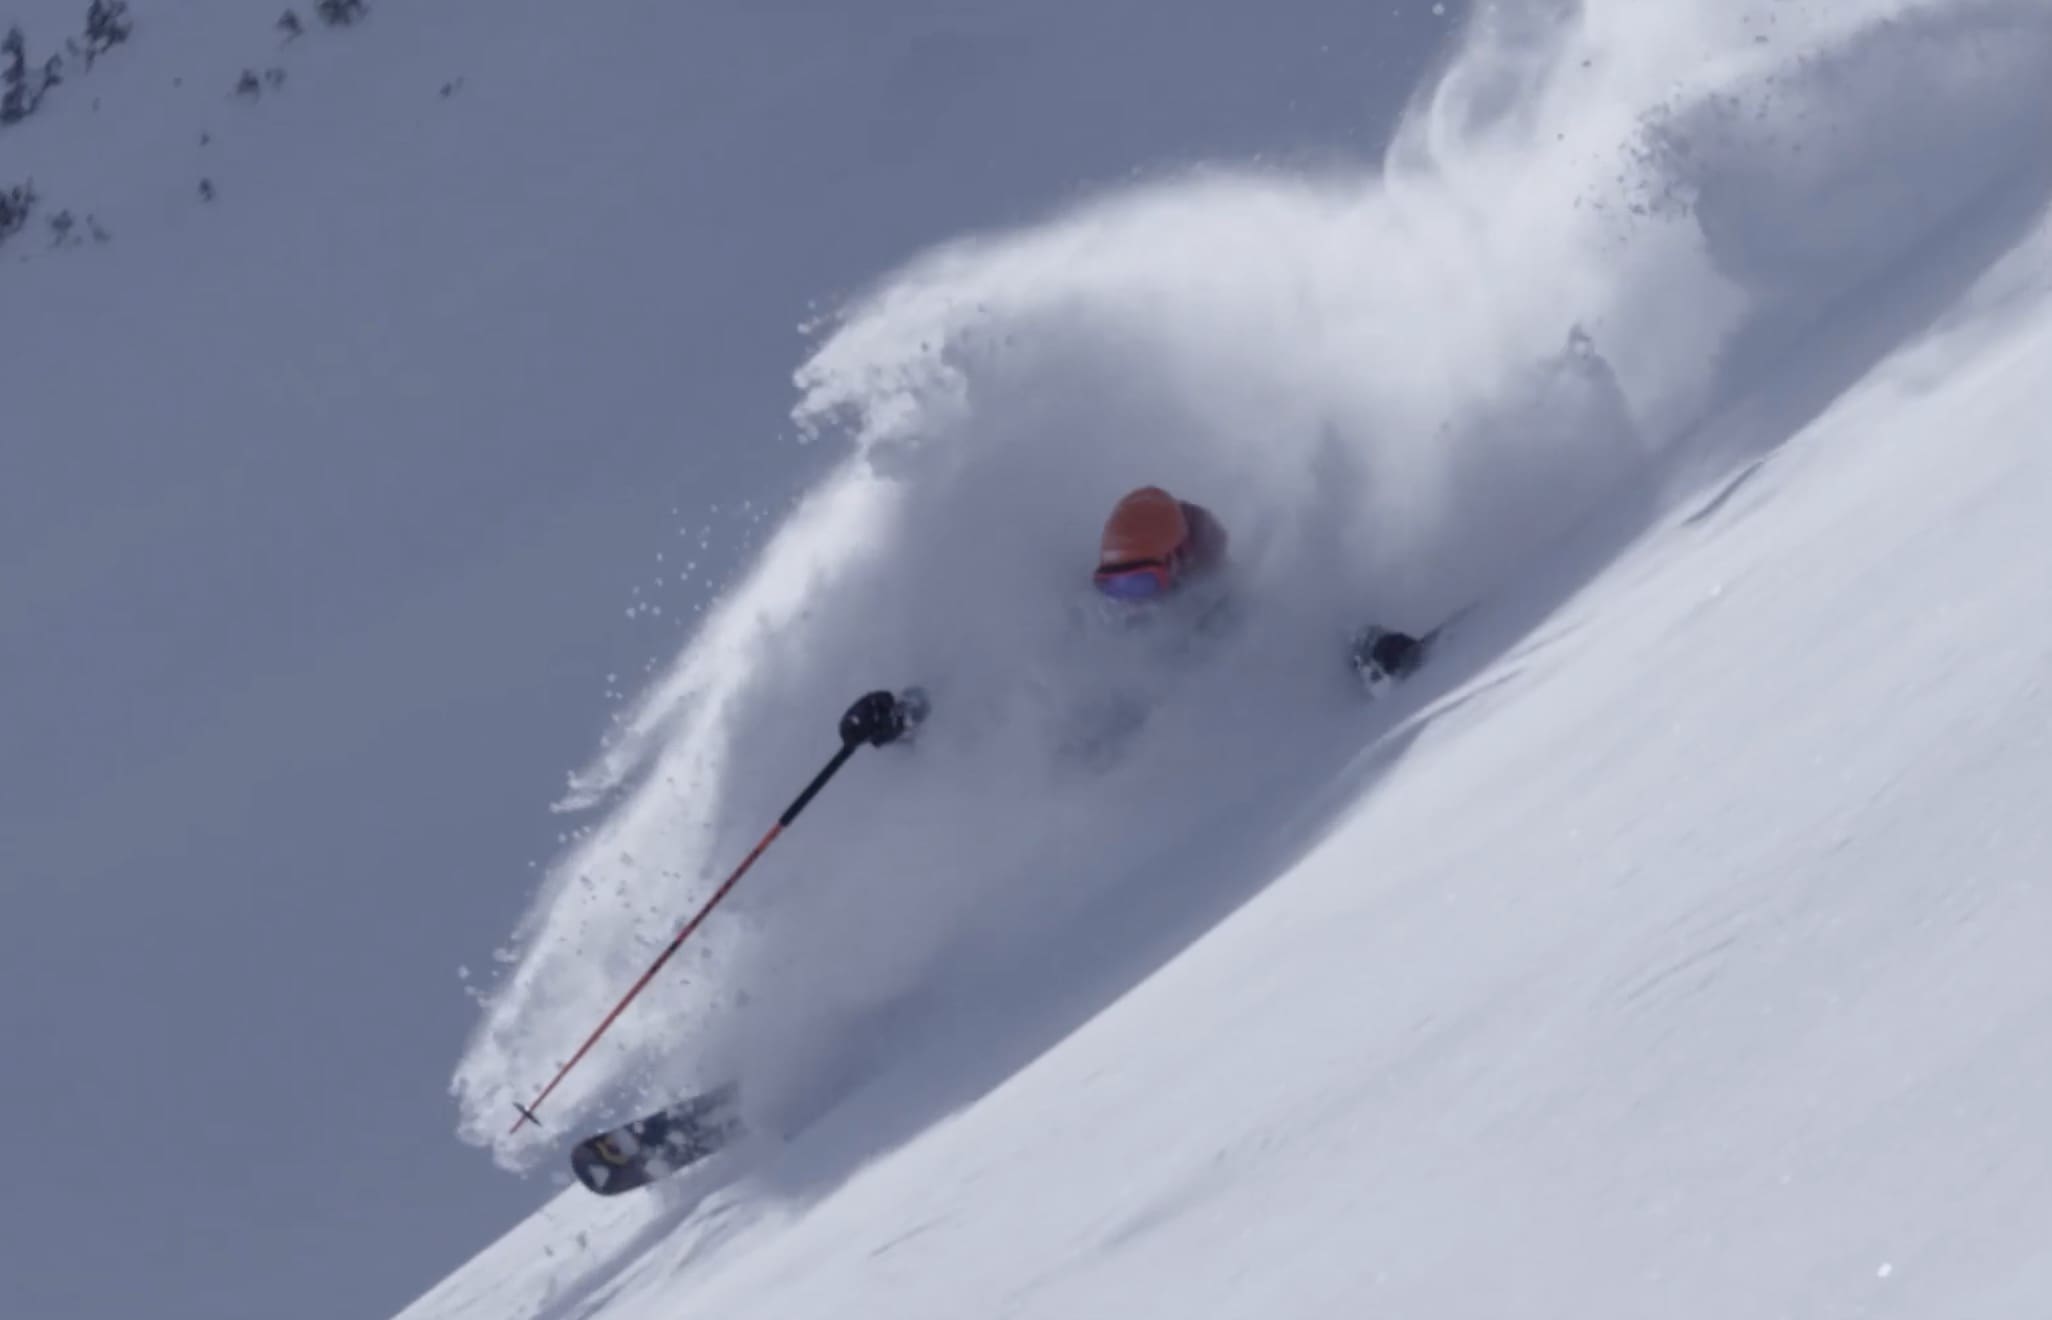 VIDEO: This Is What The “Greatest Snow On Earth” Looks Like ...